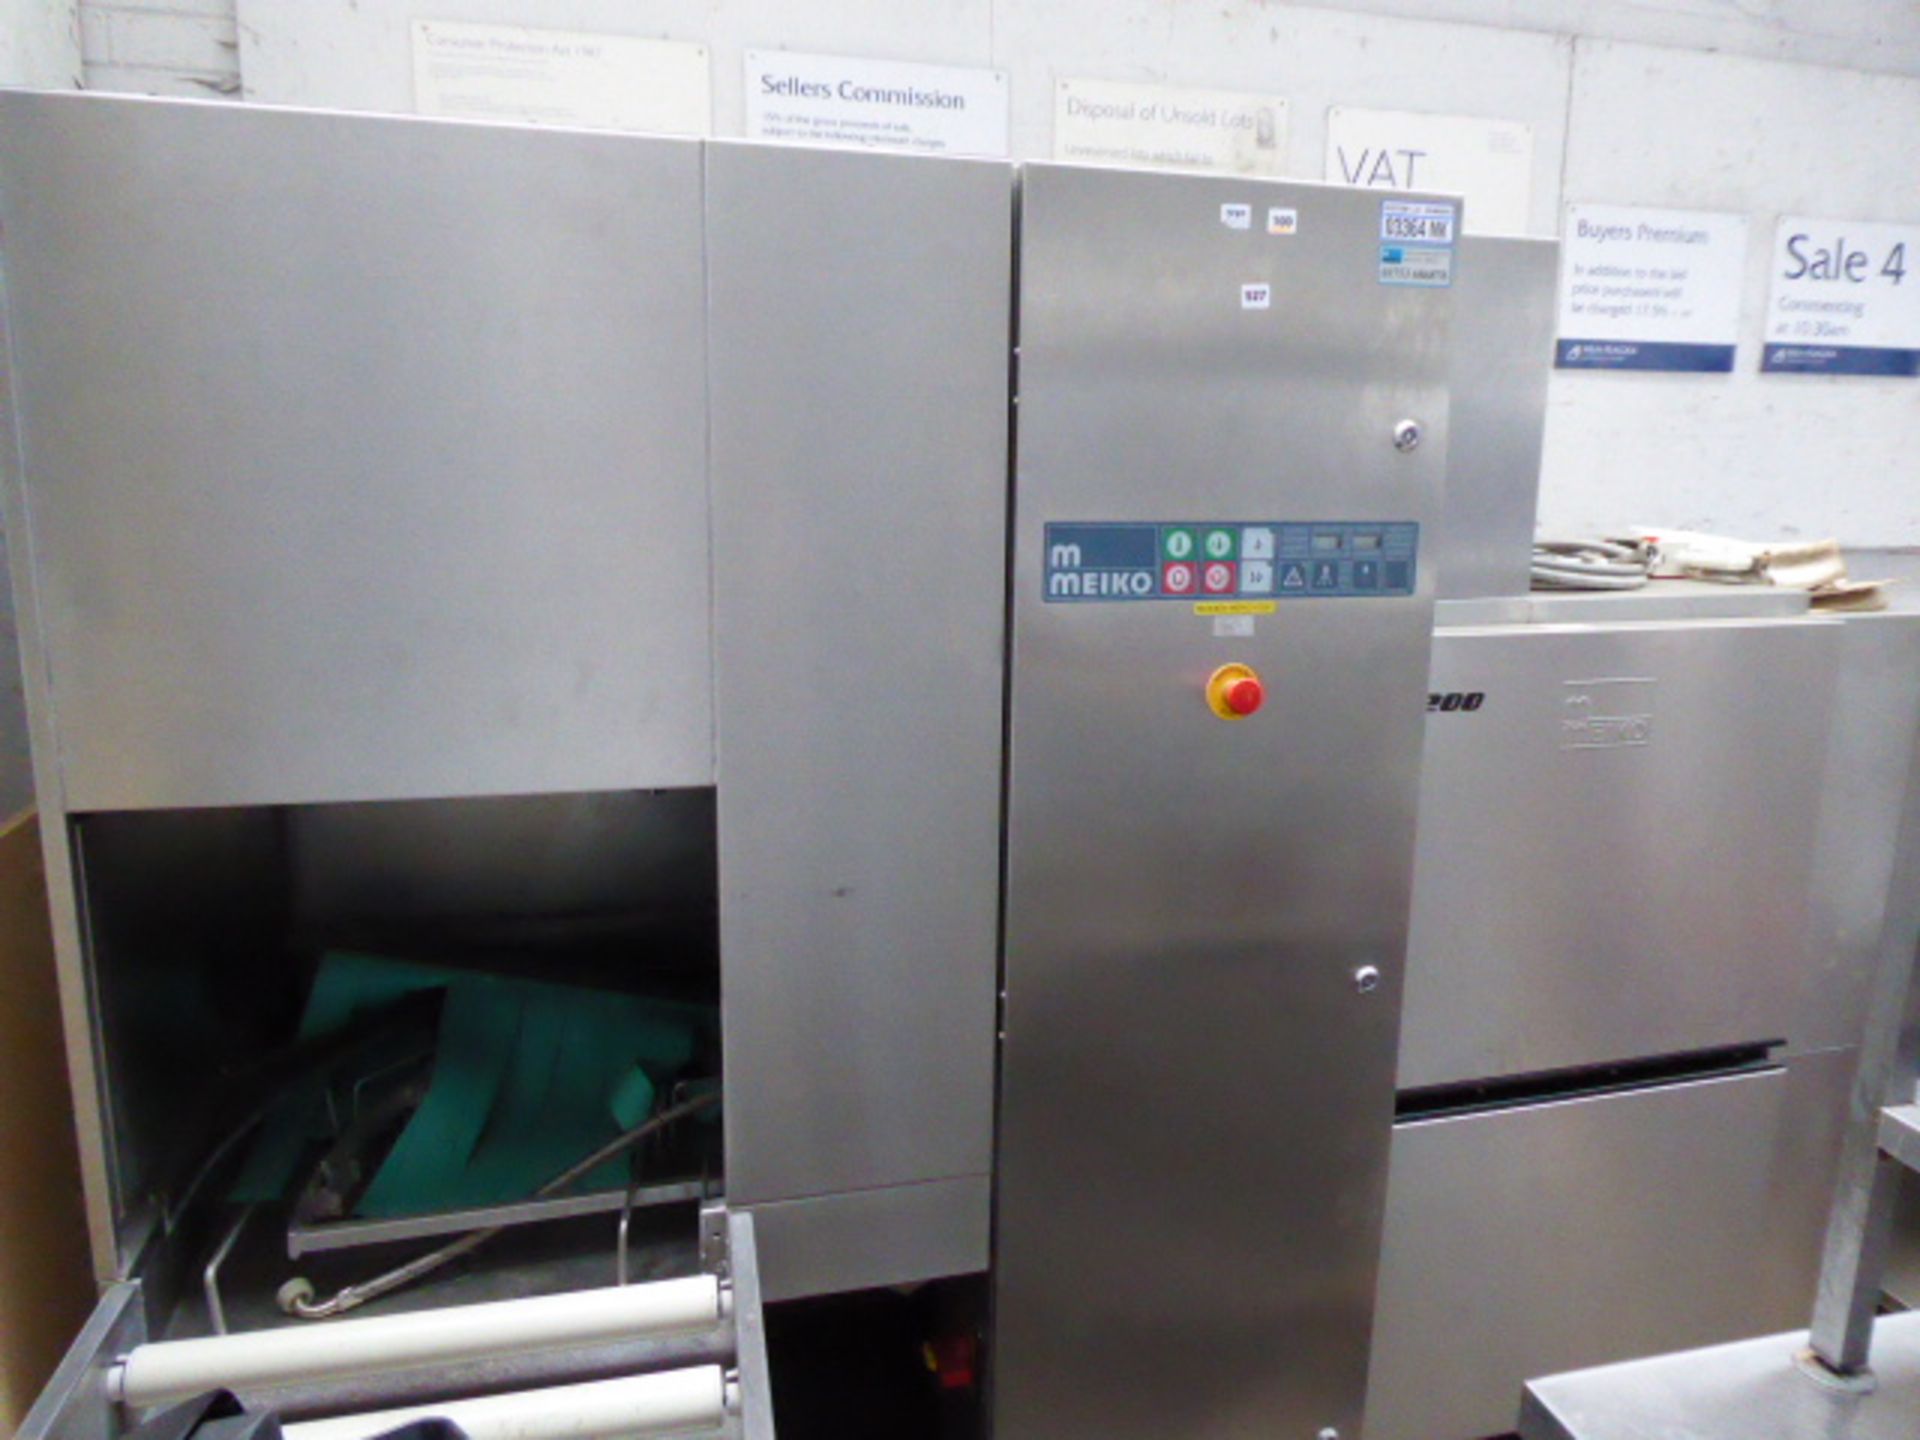 Meiko model K200 deck type dishwasher with an 150 cm pre rinse and waste disposal unit and a